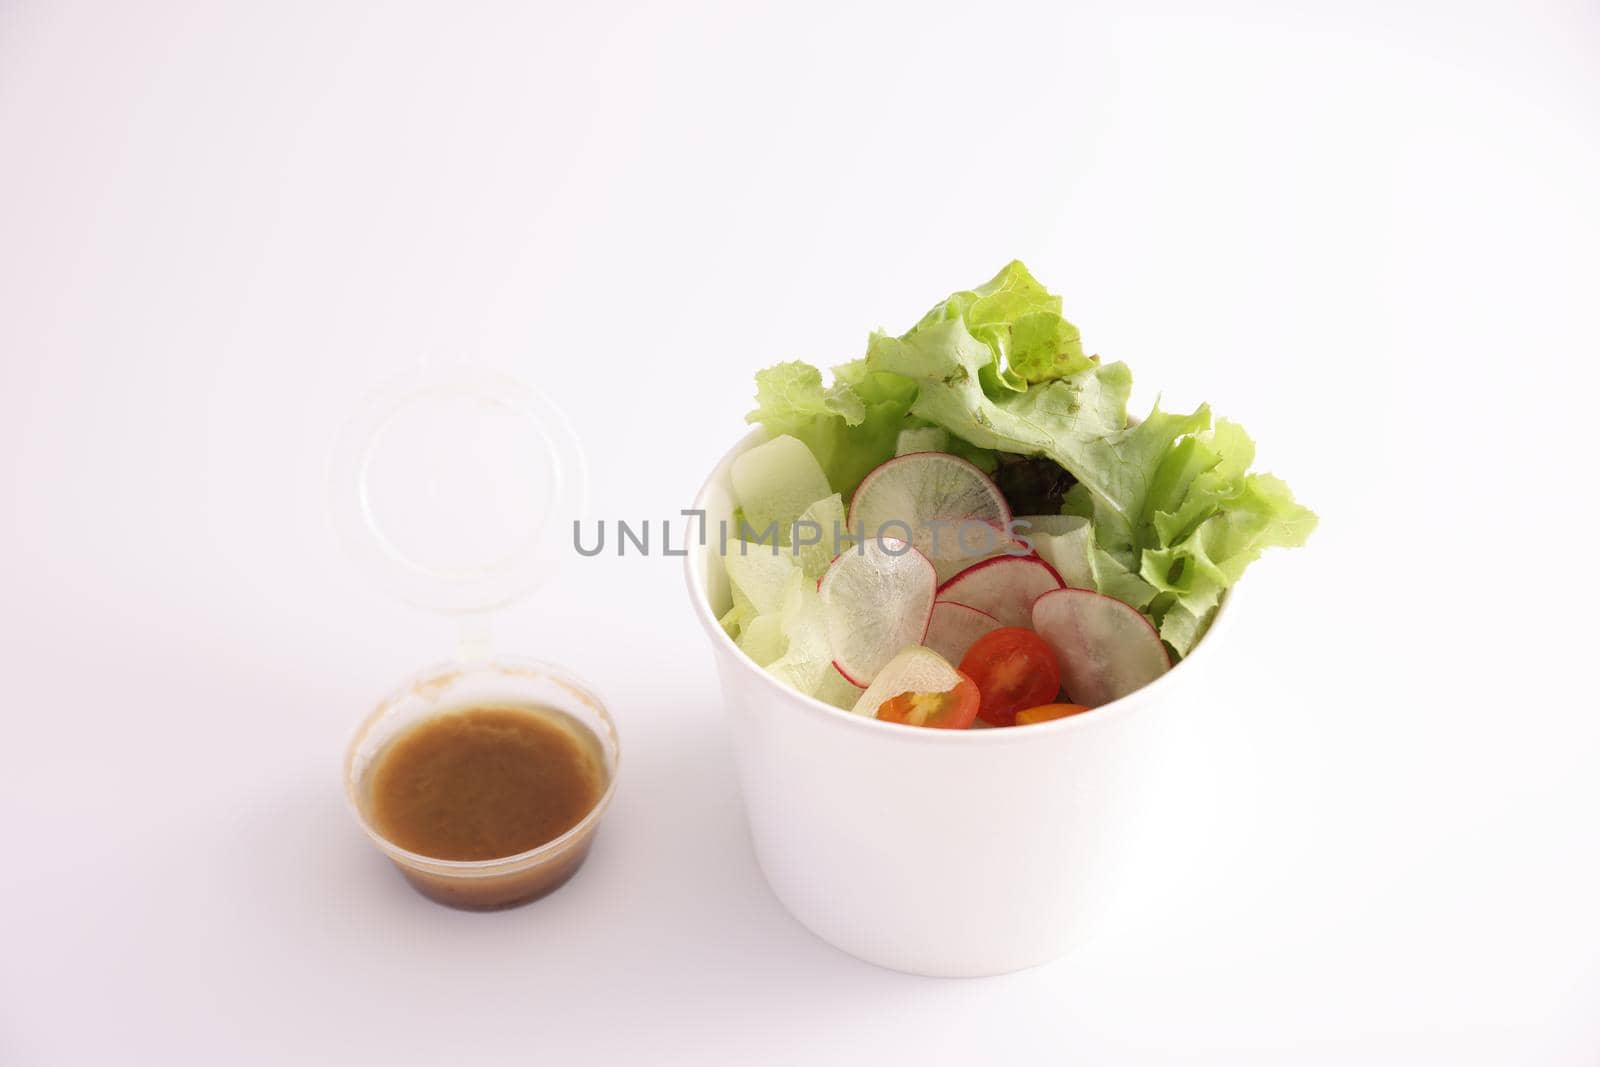 Salad in plastic package for take away or food delivery isolated on white background by piyato